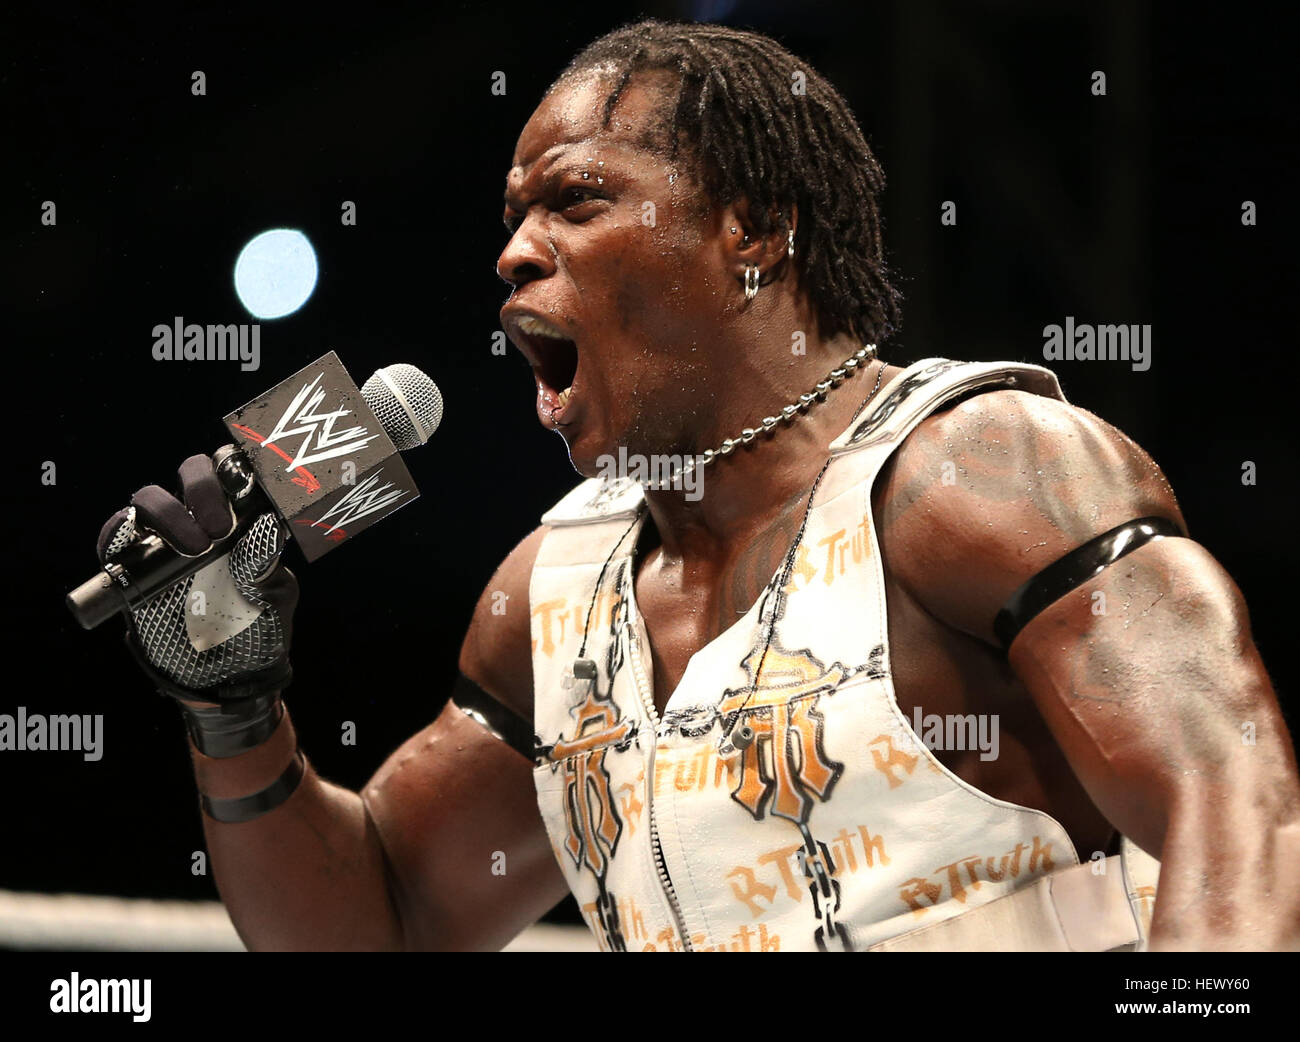 DURBAN, SOUTH AFRICA - AUGUST 01: R-Truth during the WWE World Tour 2013 at Westridge Park Stadium on August 01, 2013 in Durban, South Africa. (Photo Stock Photo